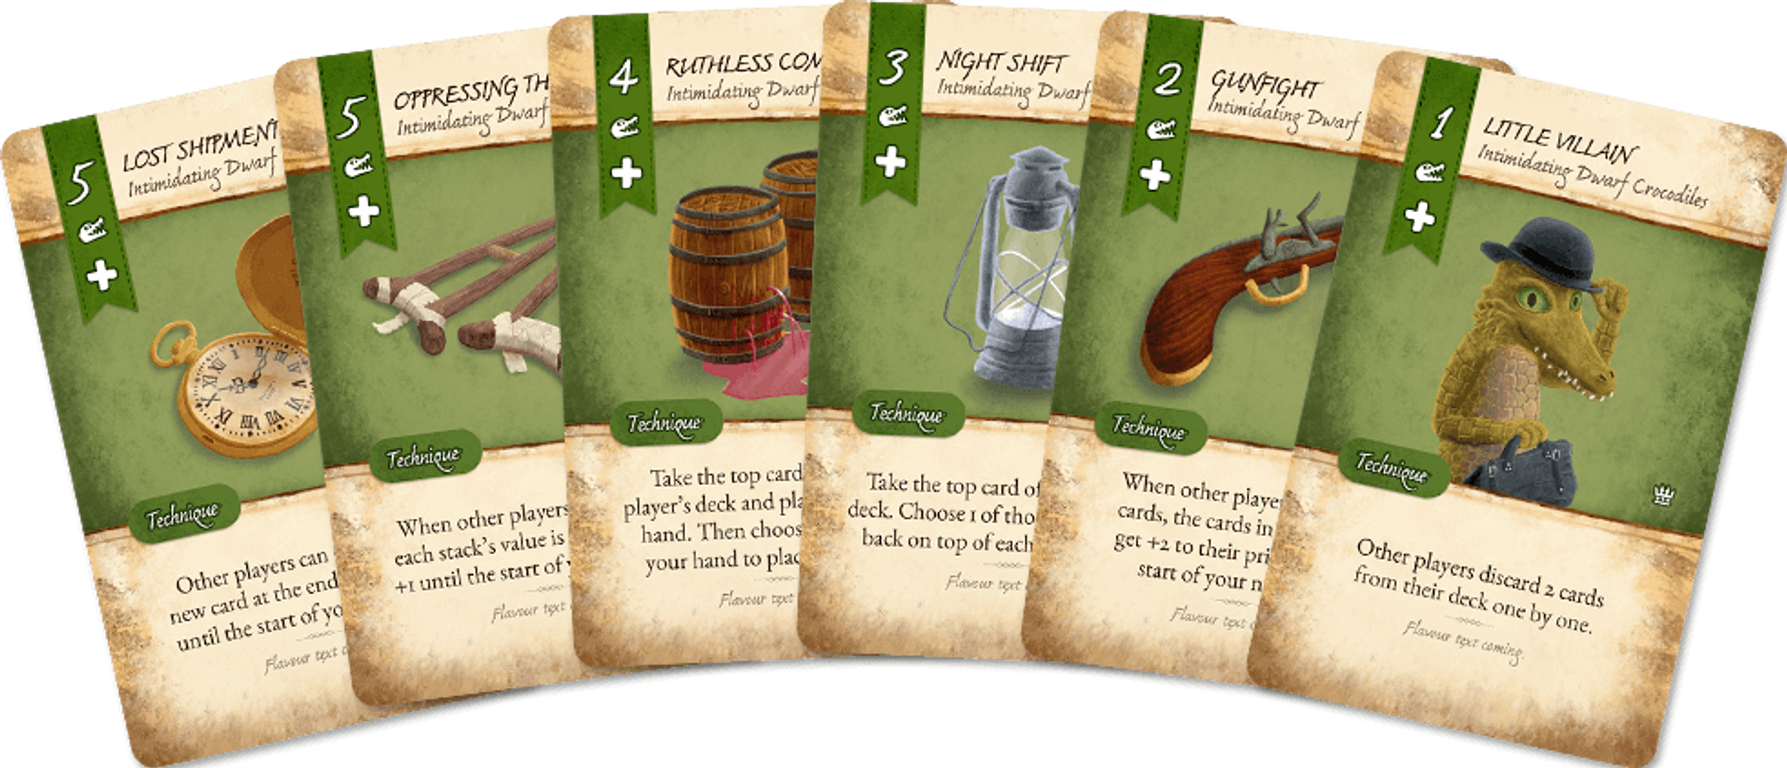 Dale of Merchants 2 cards